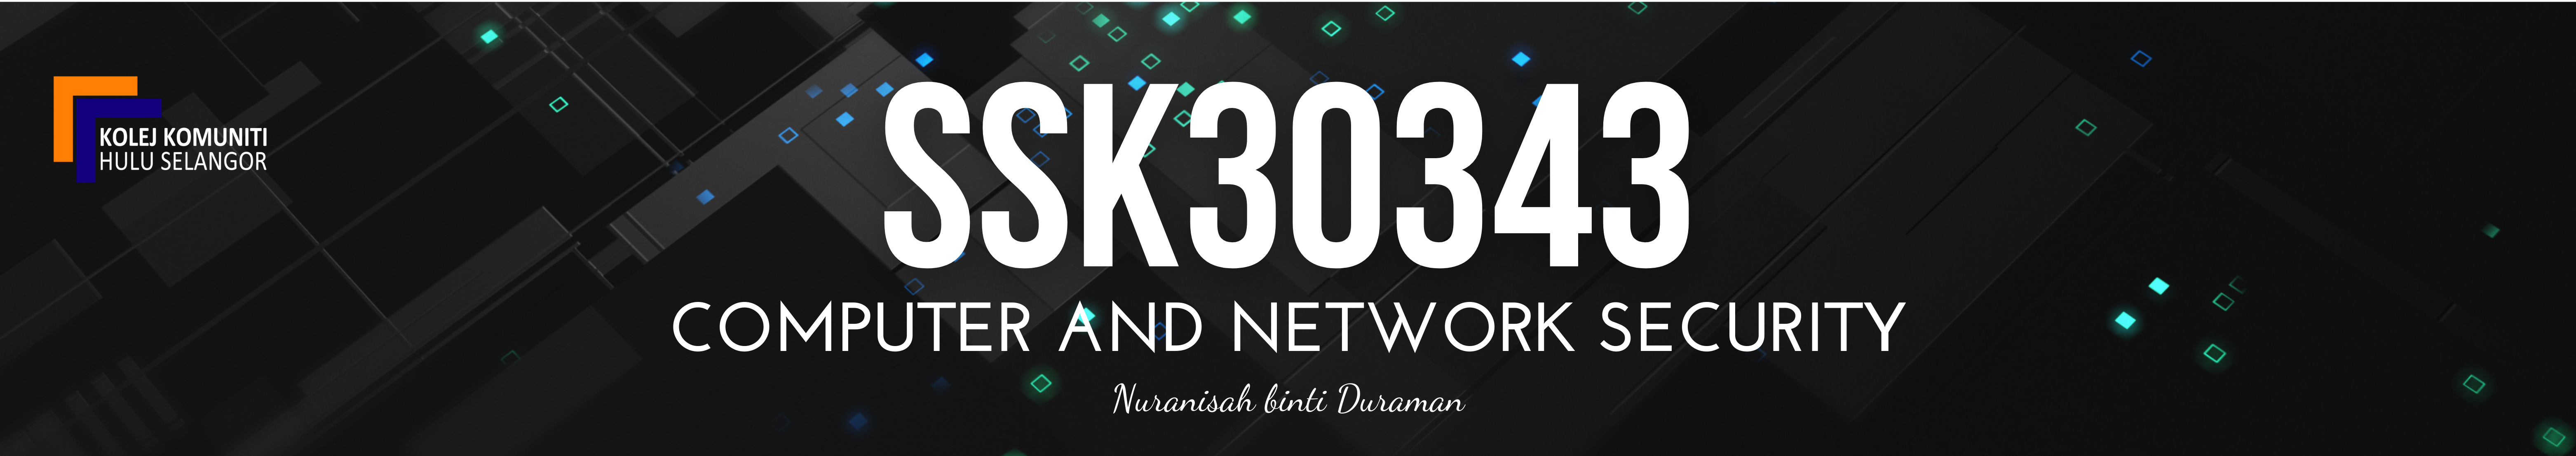 KKHS | SSK30343 COMPUTER AND NETWORK SECURITY